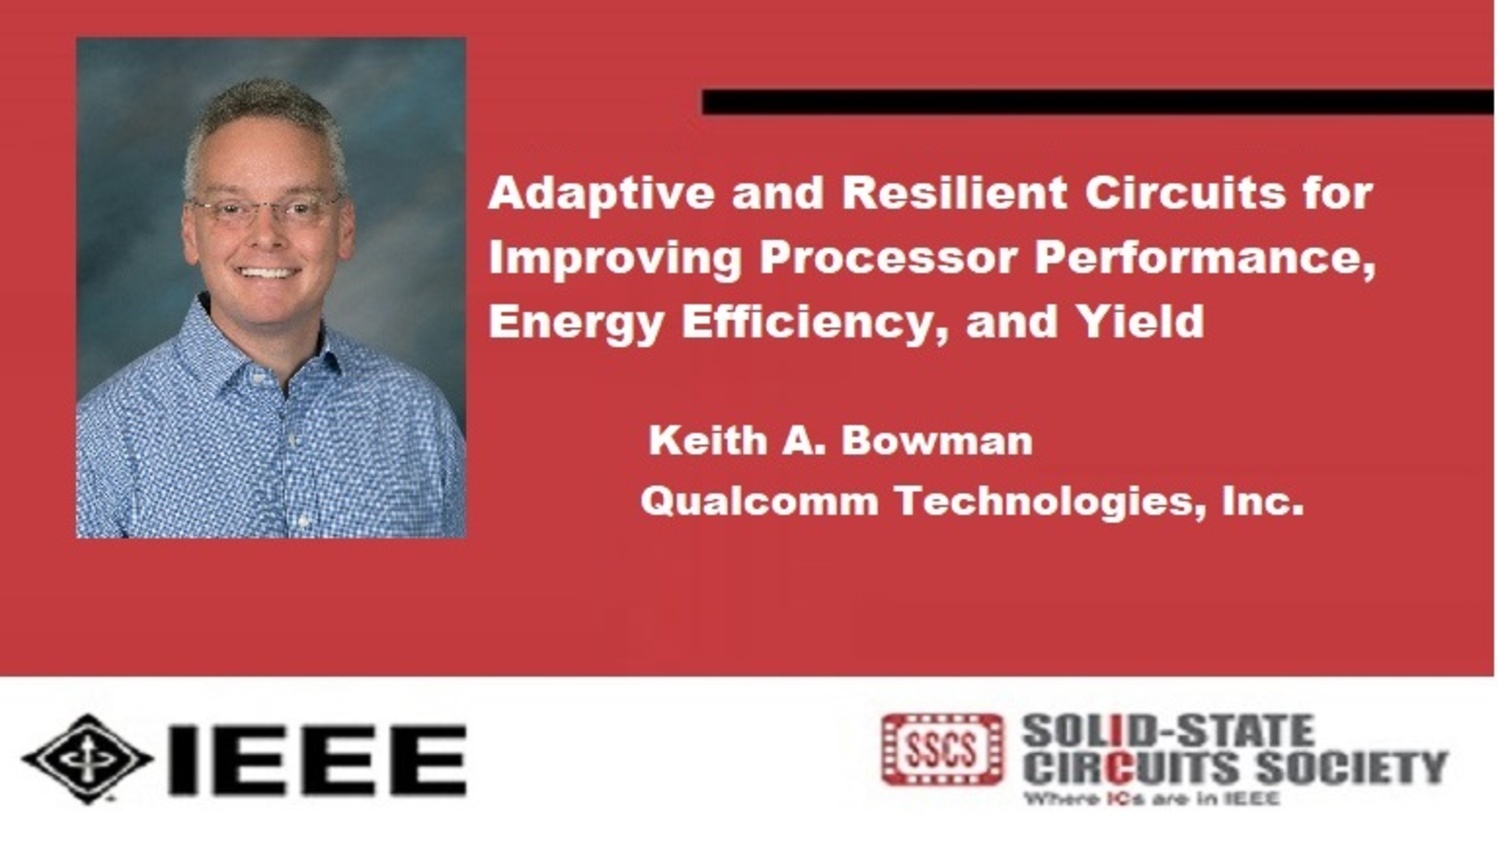 Adaptive and Resilient Circuits for Improving Processor Performance, Energy Efficiency and Yield